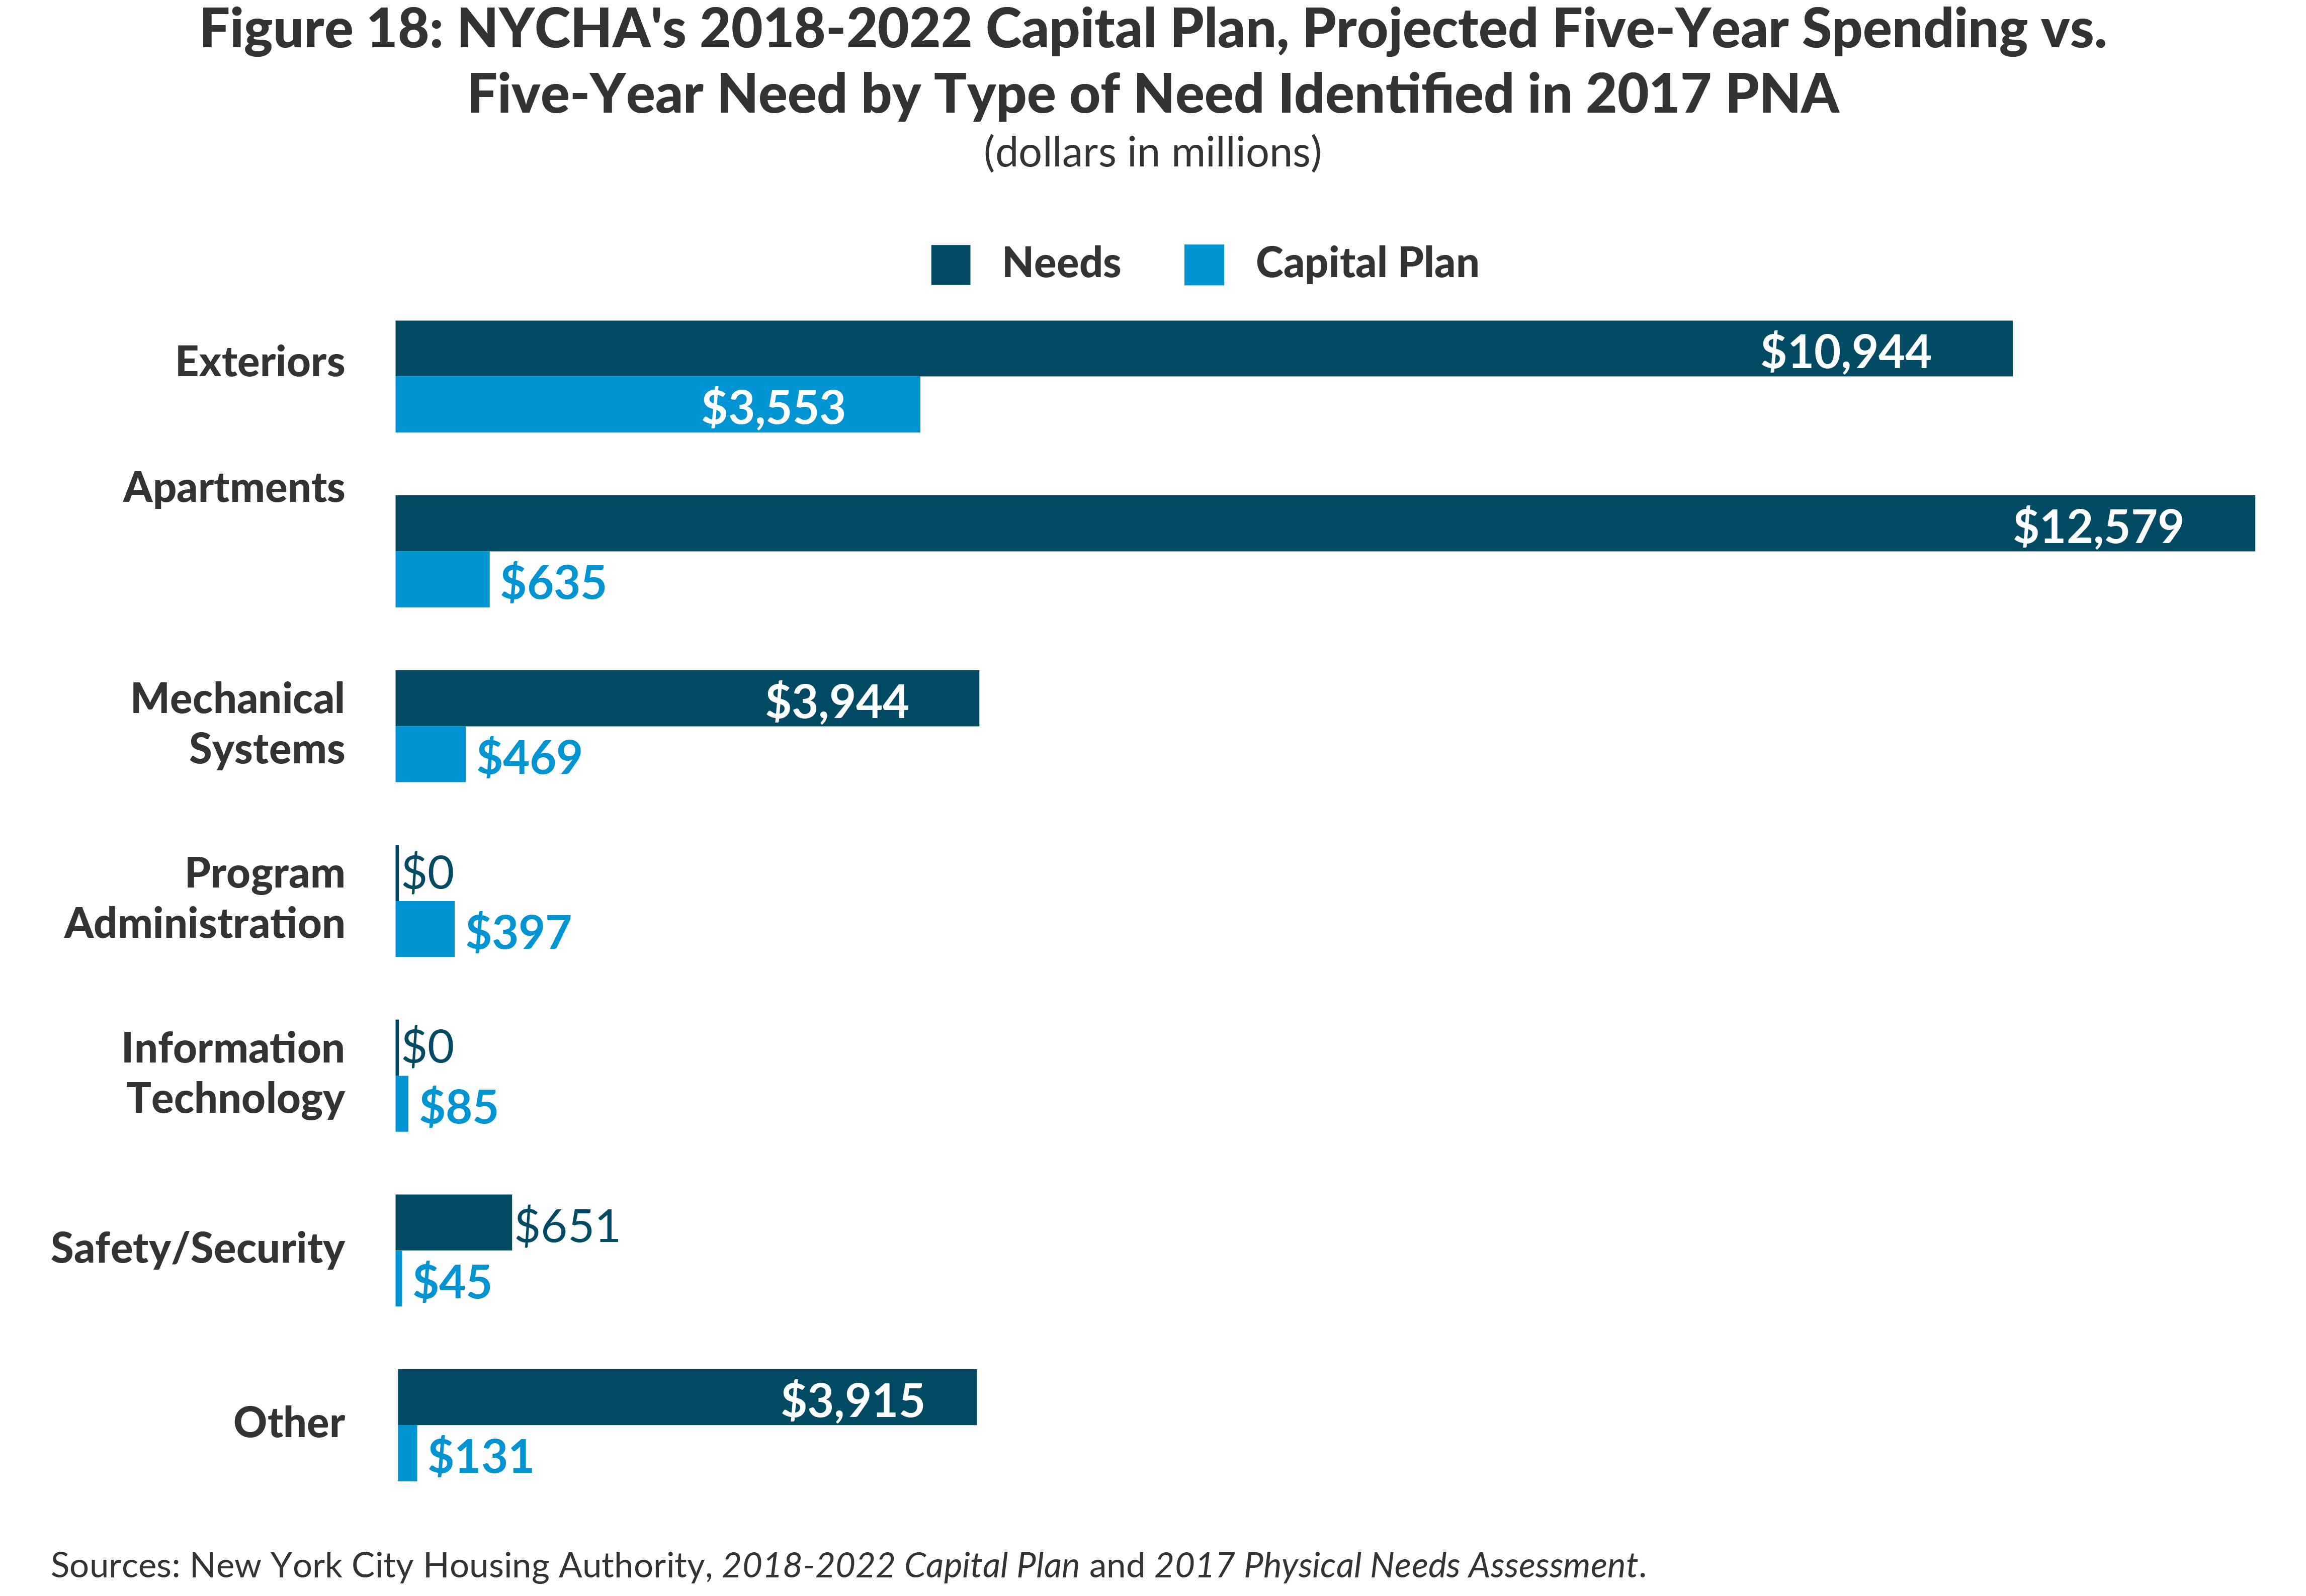 Figure 18: NYCHA's 2018-2022 Capital Plan, Projected Five-Year Spending vs.Five-Year Need by Type of Need Identified in 2017 PNA